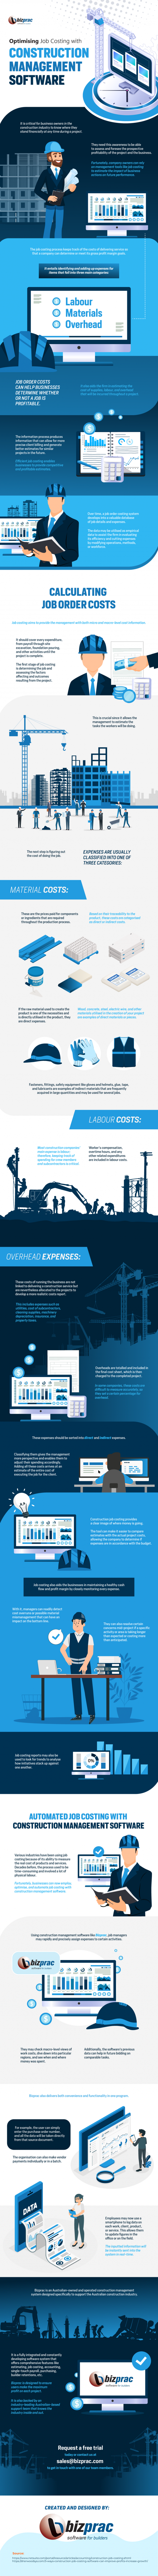 Optimizing_Job_Costing_with_Construction_Management_Software_infographic_image
